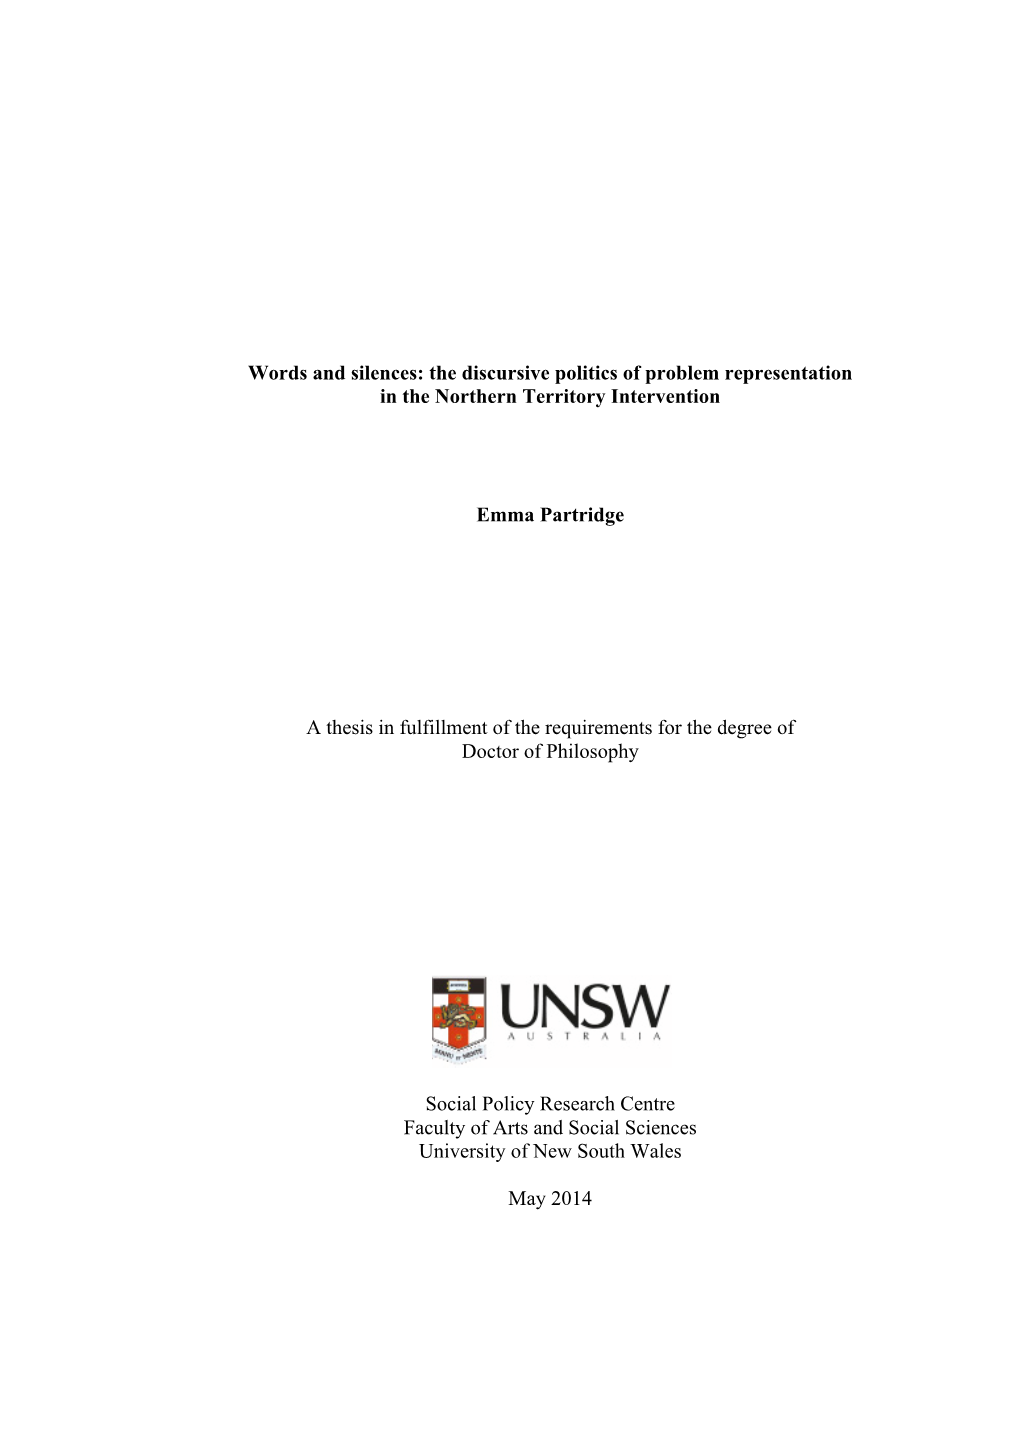 The Discursive Politics of Problem Representation in the Northern Territory Intervention